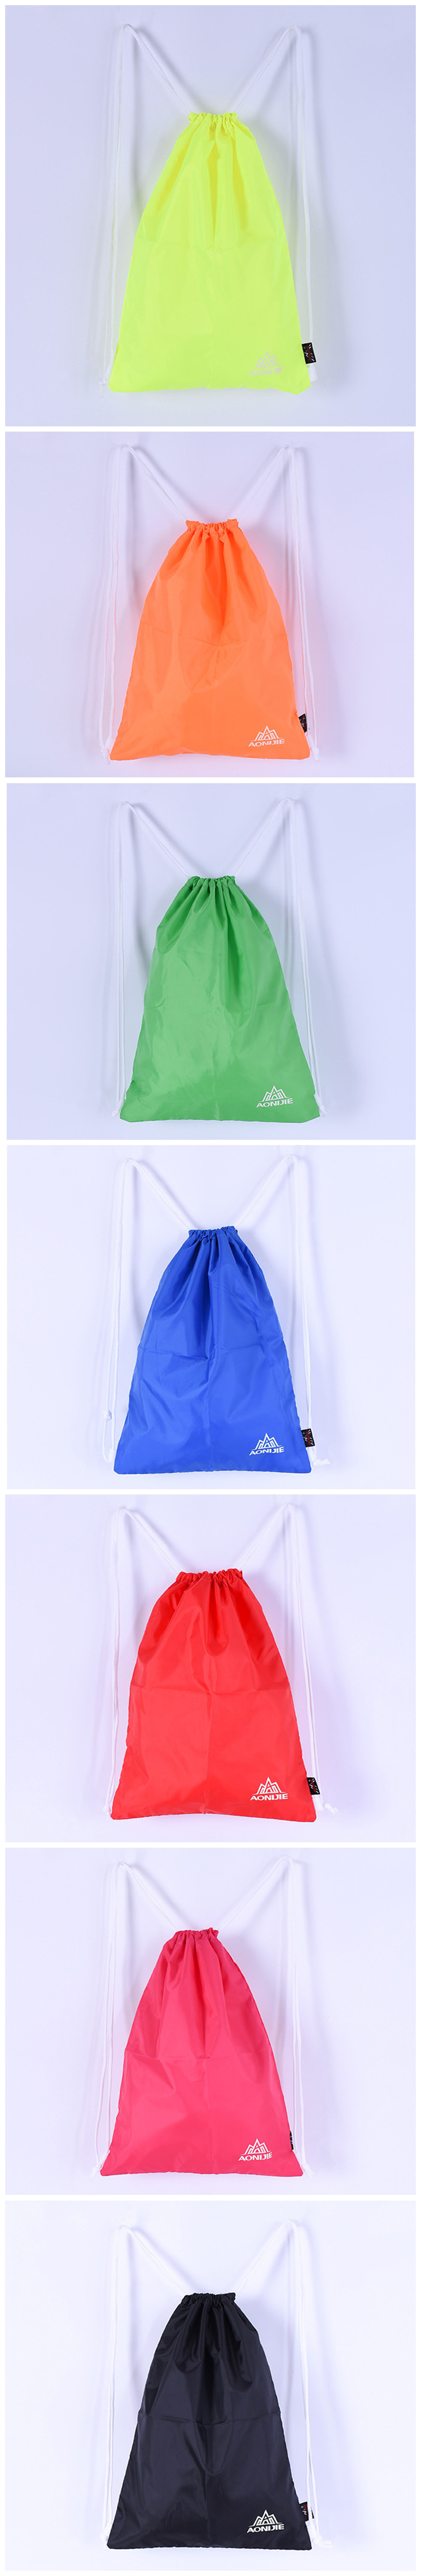 AONIJIE-Outdoor-Sports-Drawstring-Backpack-Unisex-Ultralight-Climbing-Bag-Pack-Folding-Pouch-1106060